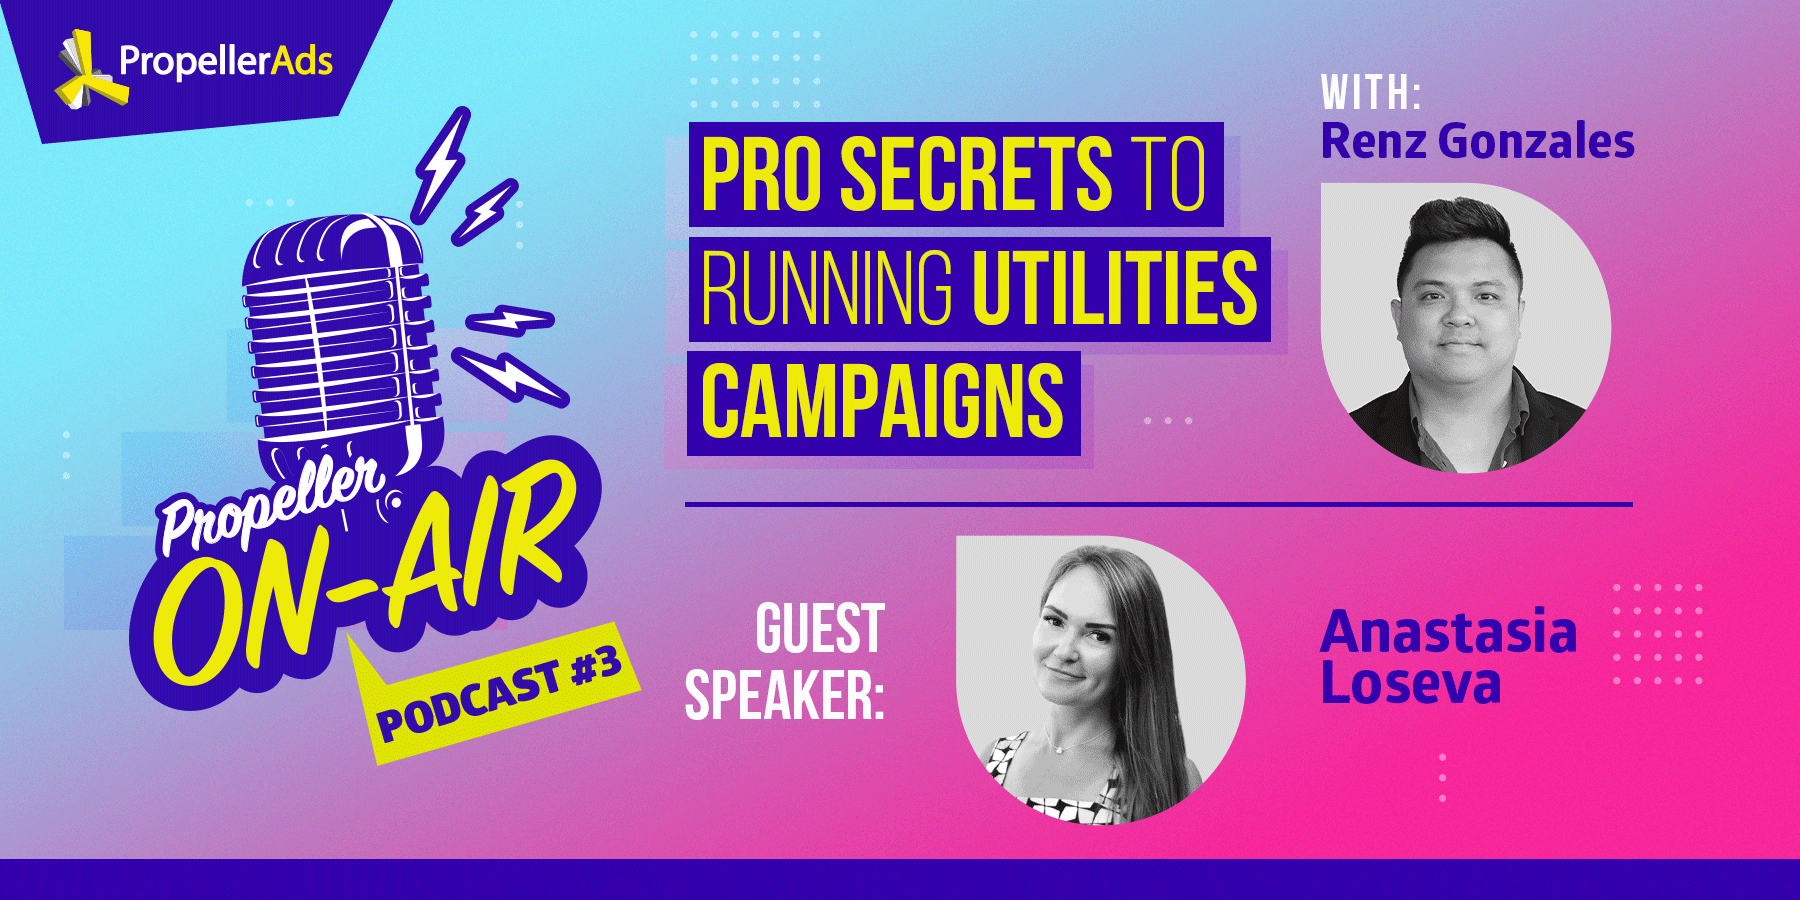 Pro Secrets to Running Utilities Campaigns [Video]